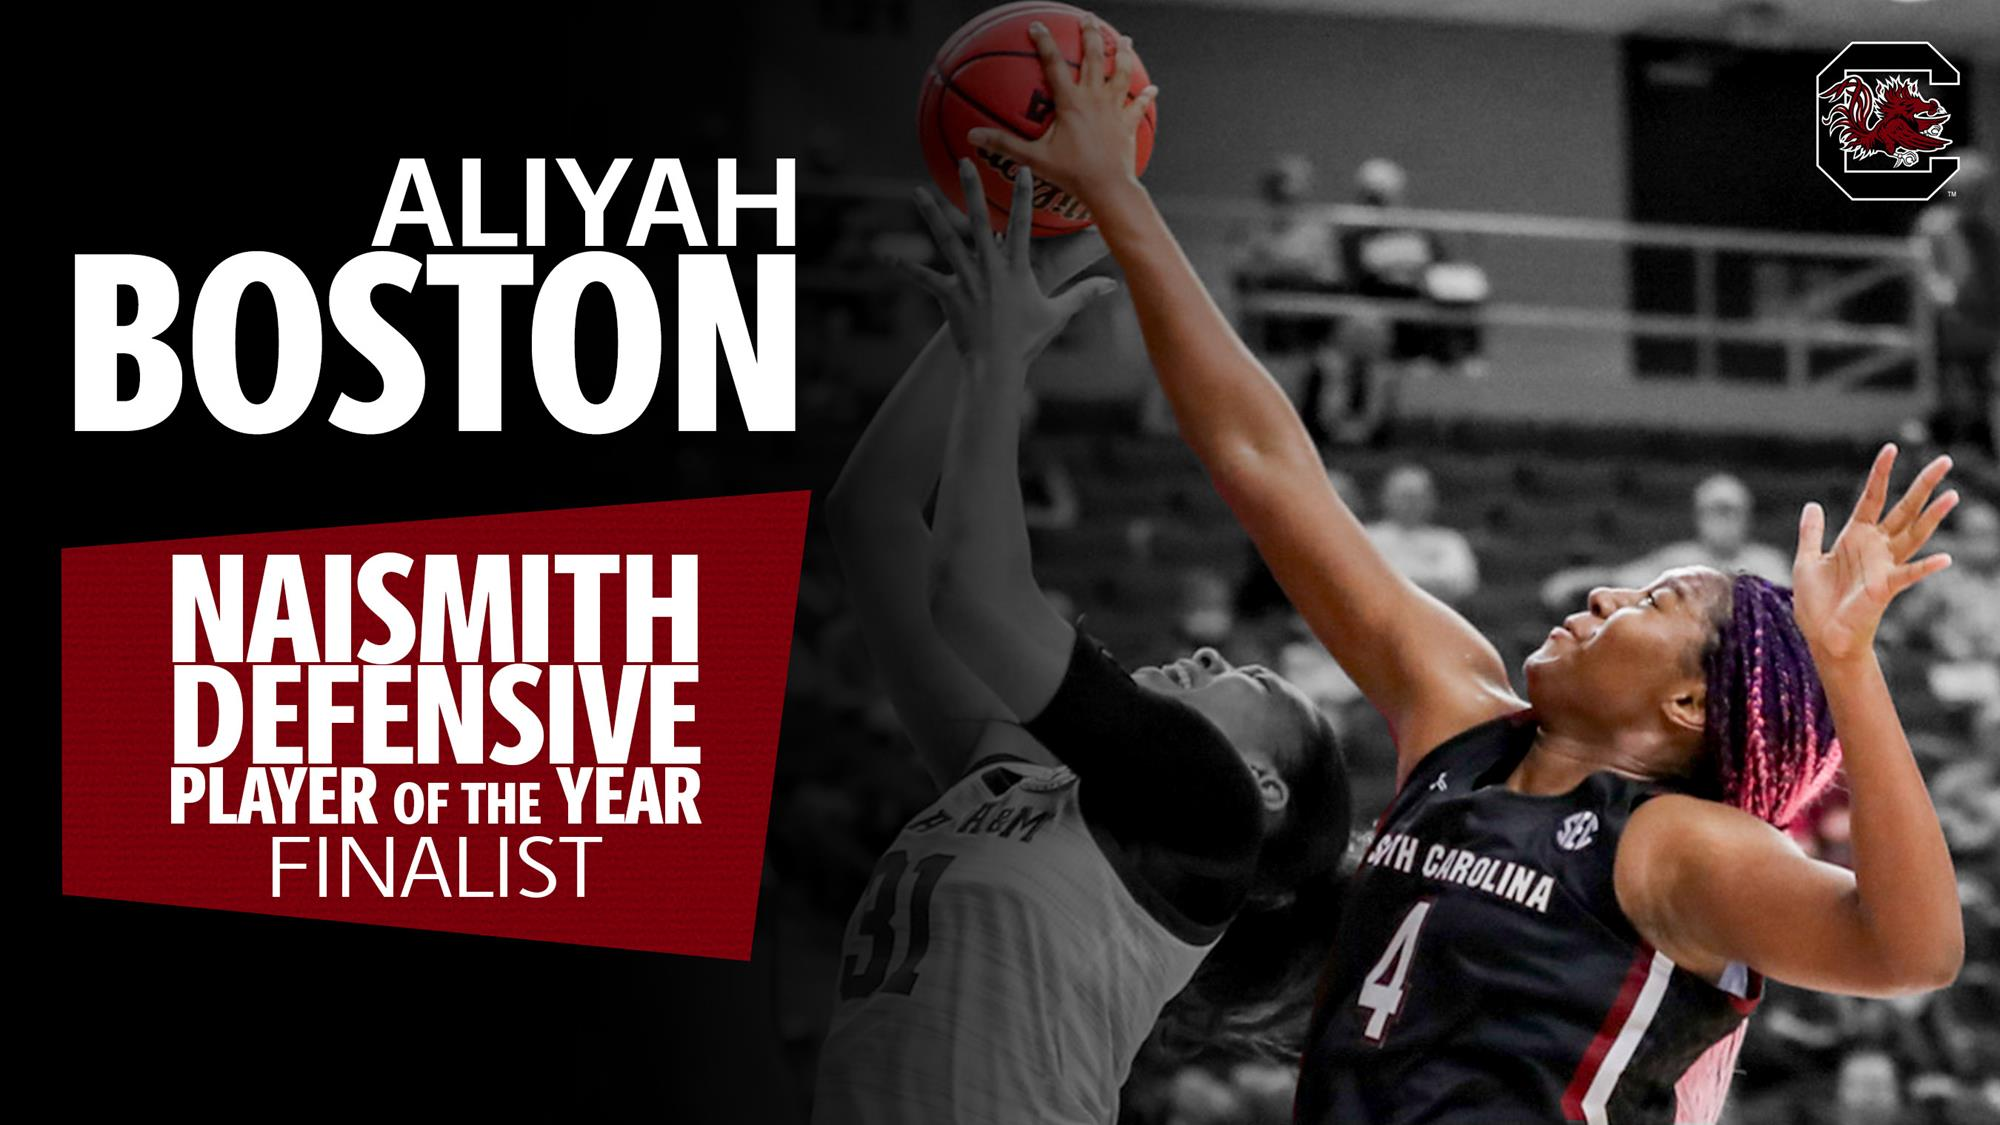 Boston Named Finalist for Naismith Defensive Player of the Year